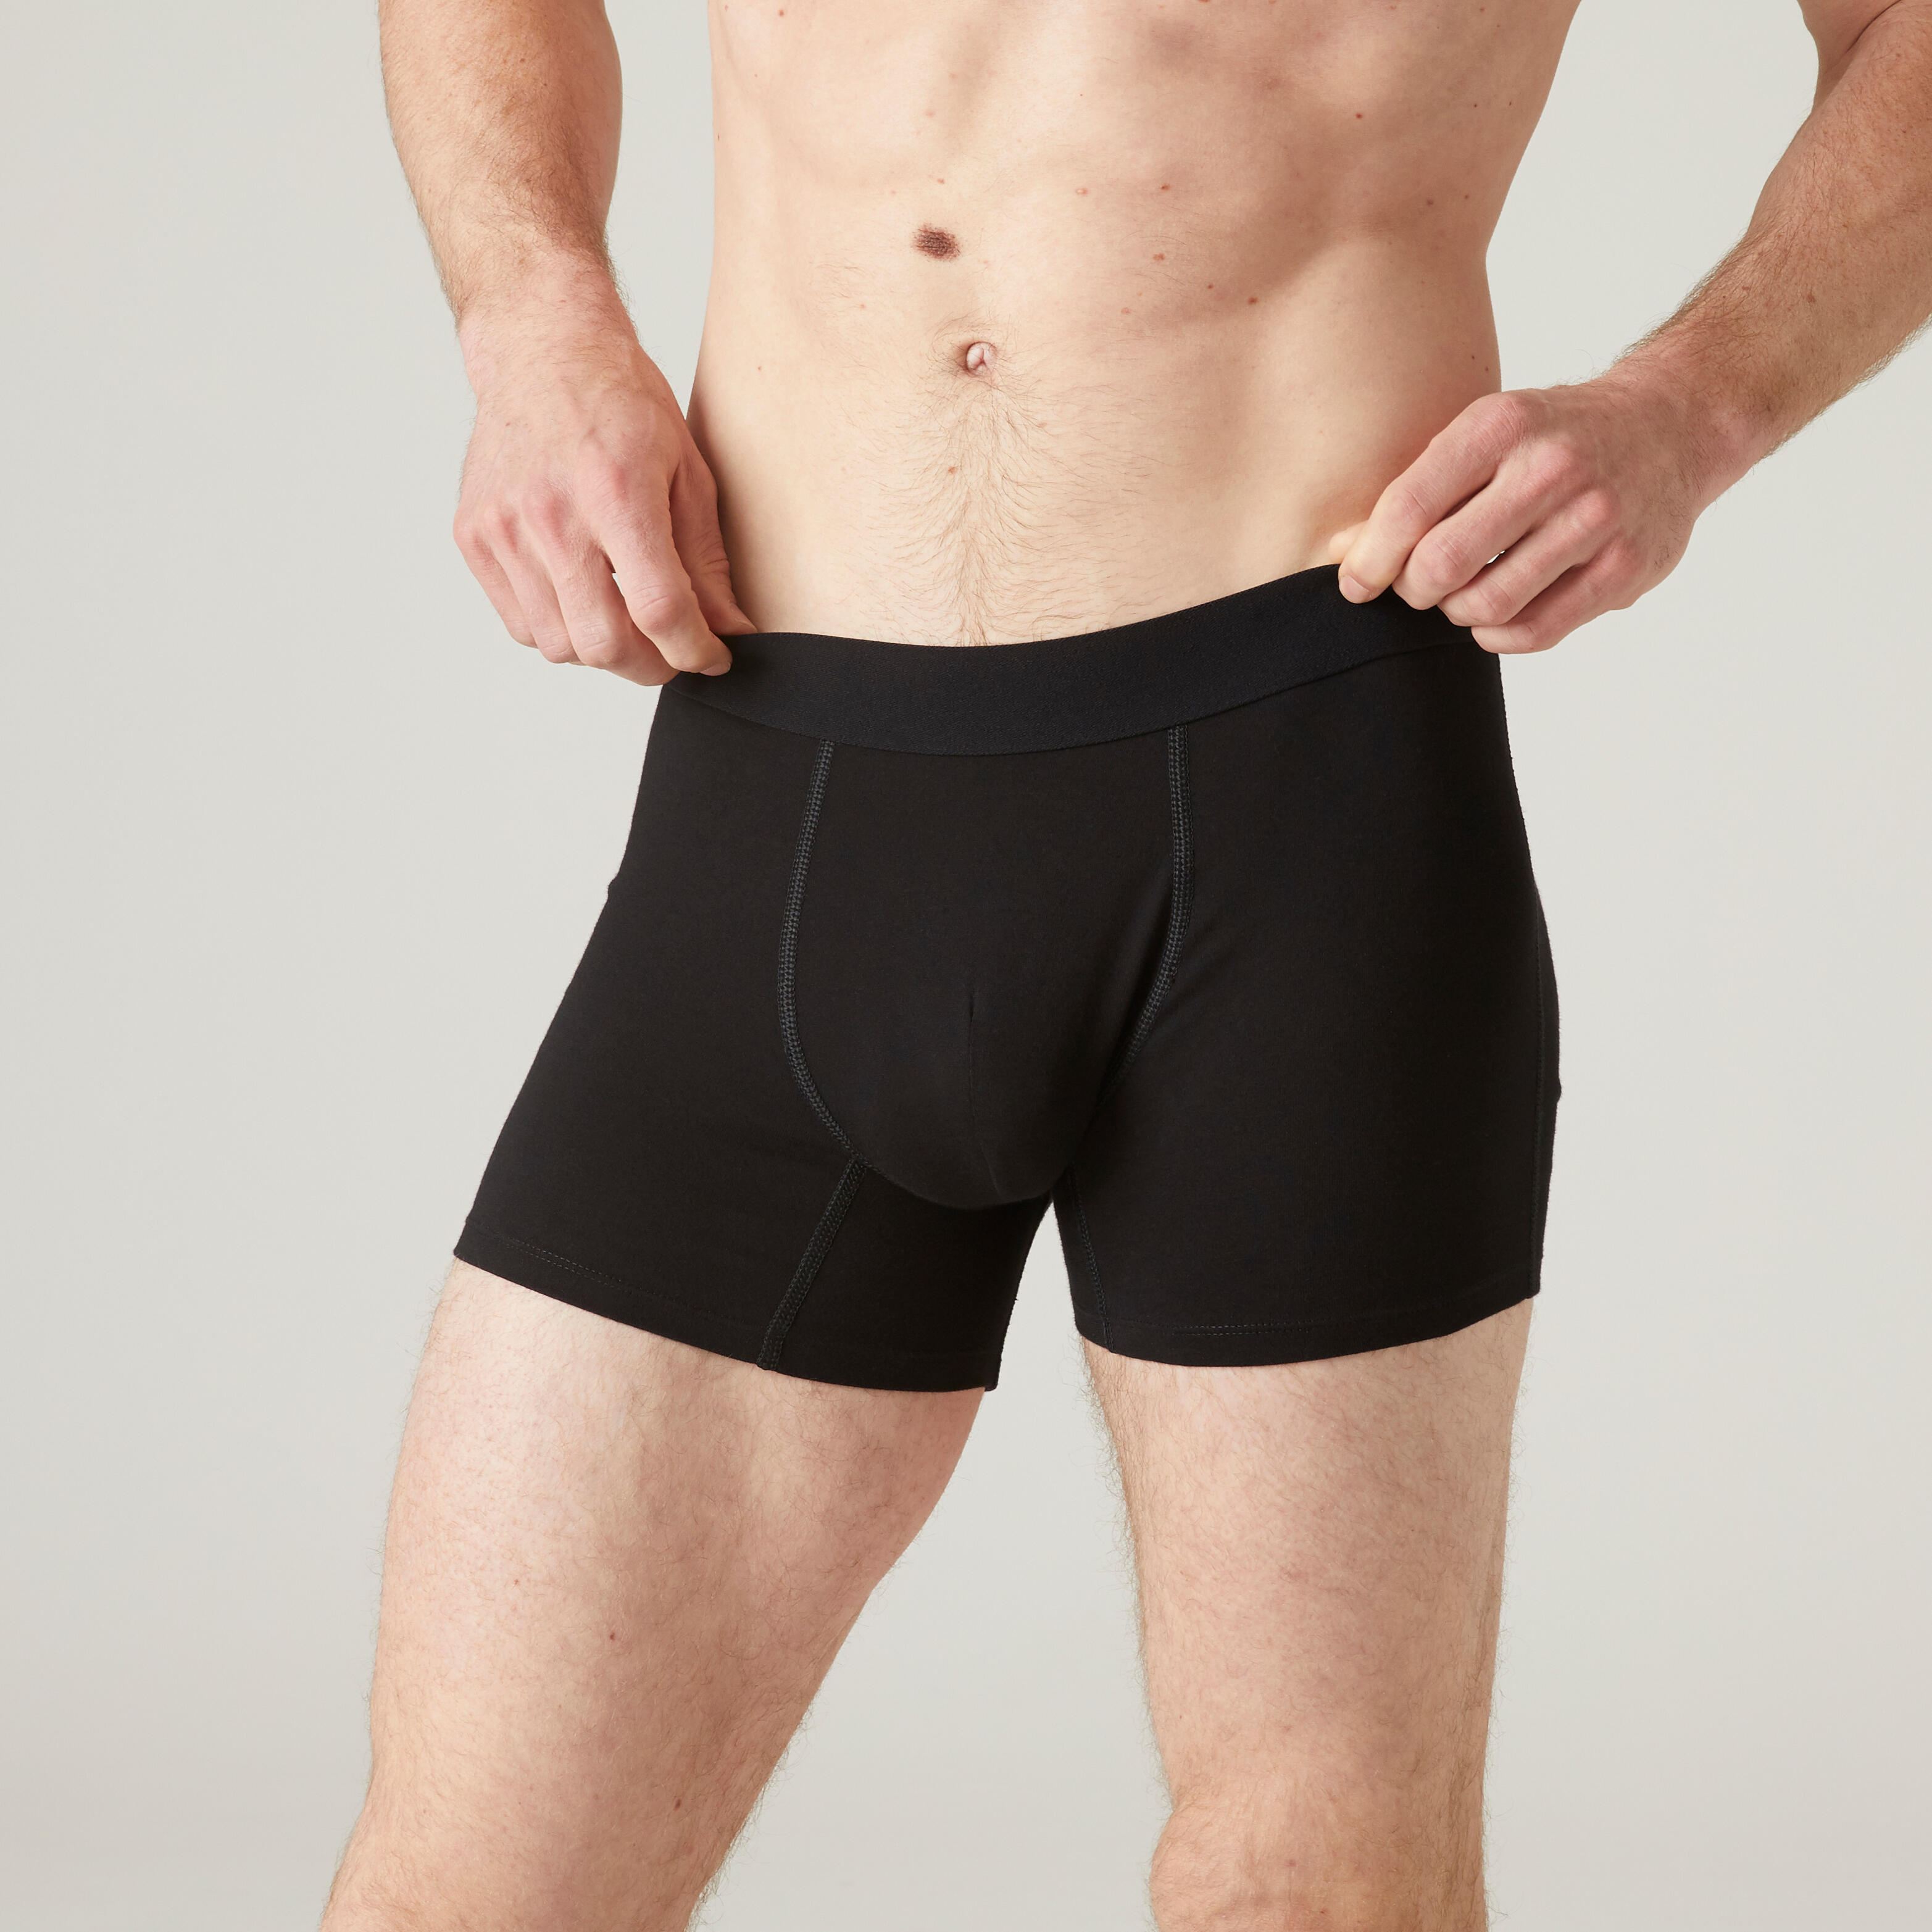 Men's Call Me Old Fashioned 3-Pack Boxer